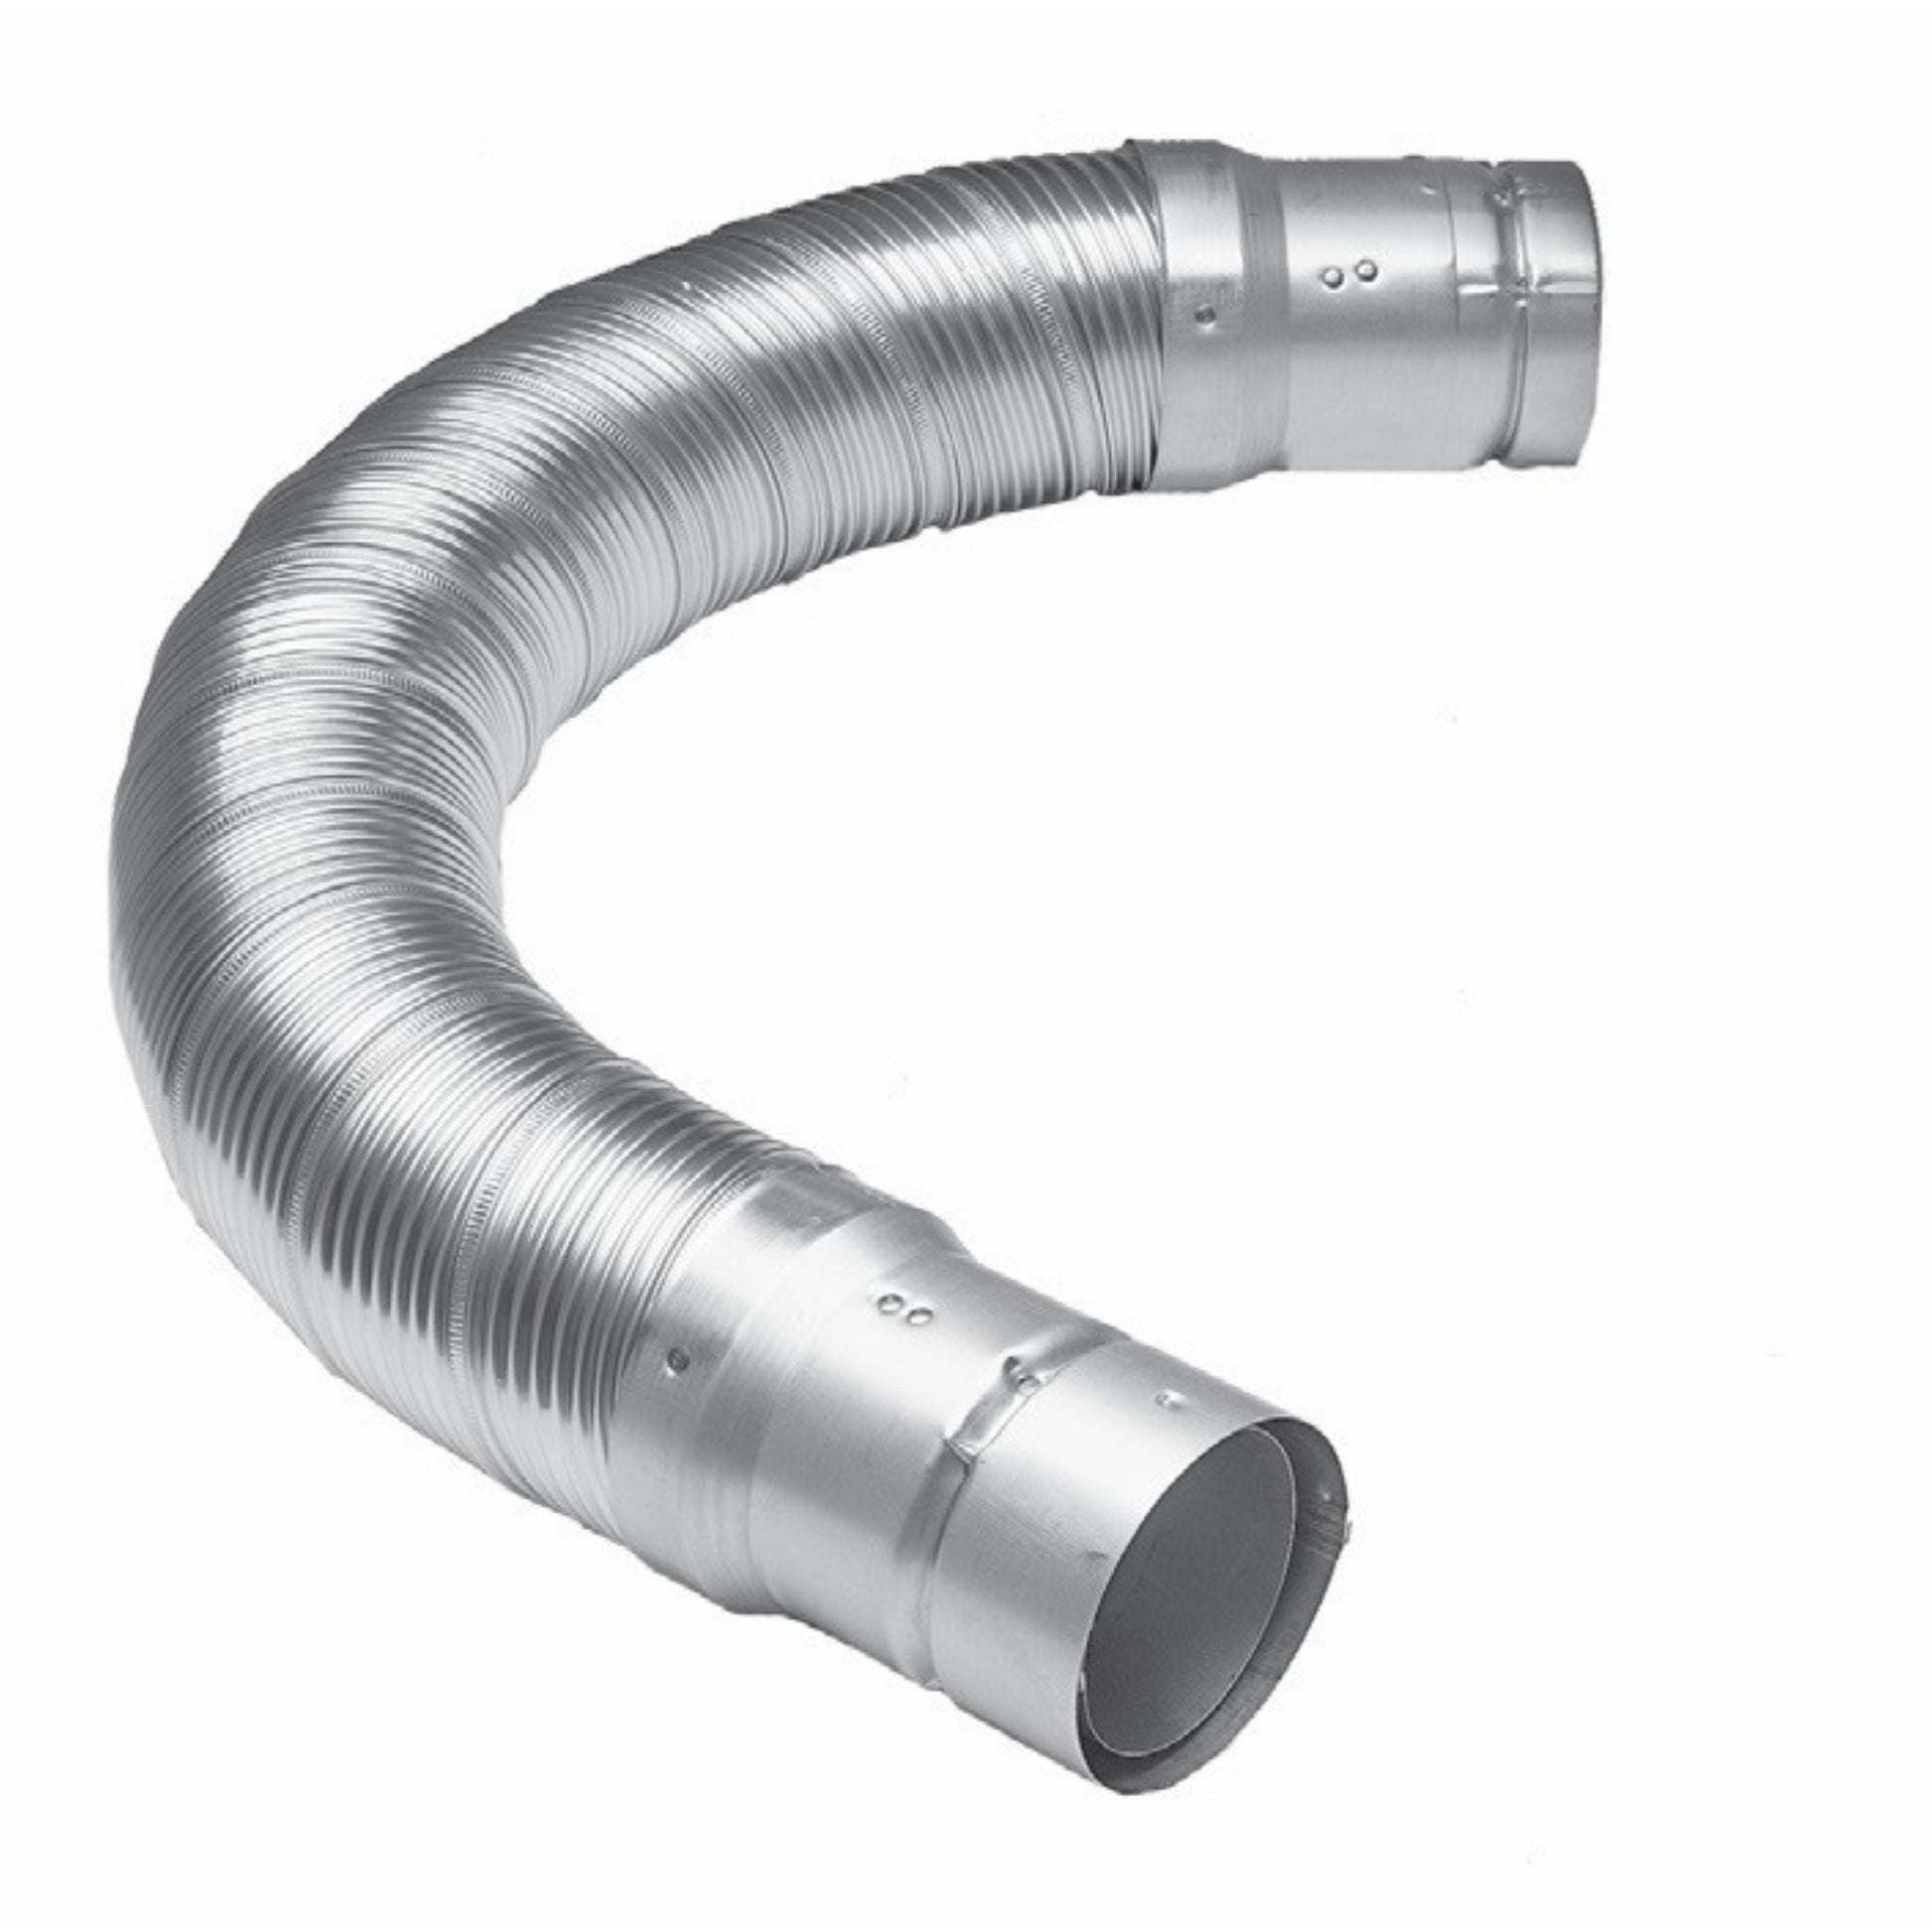 DuraVent DuraConnect II B-Vent 4" x 24" Flexible Double-Wall Gas Vent Connector